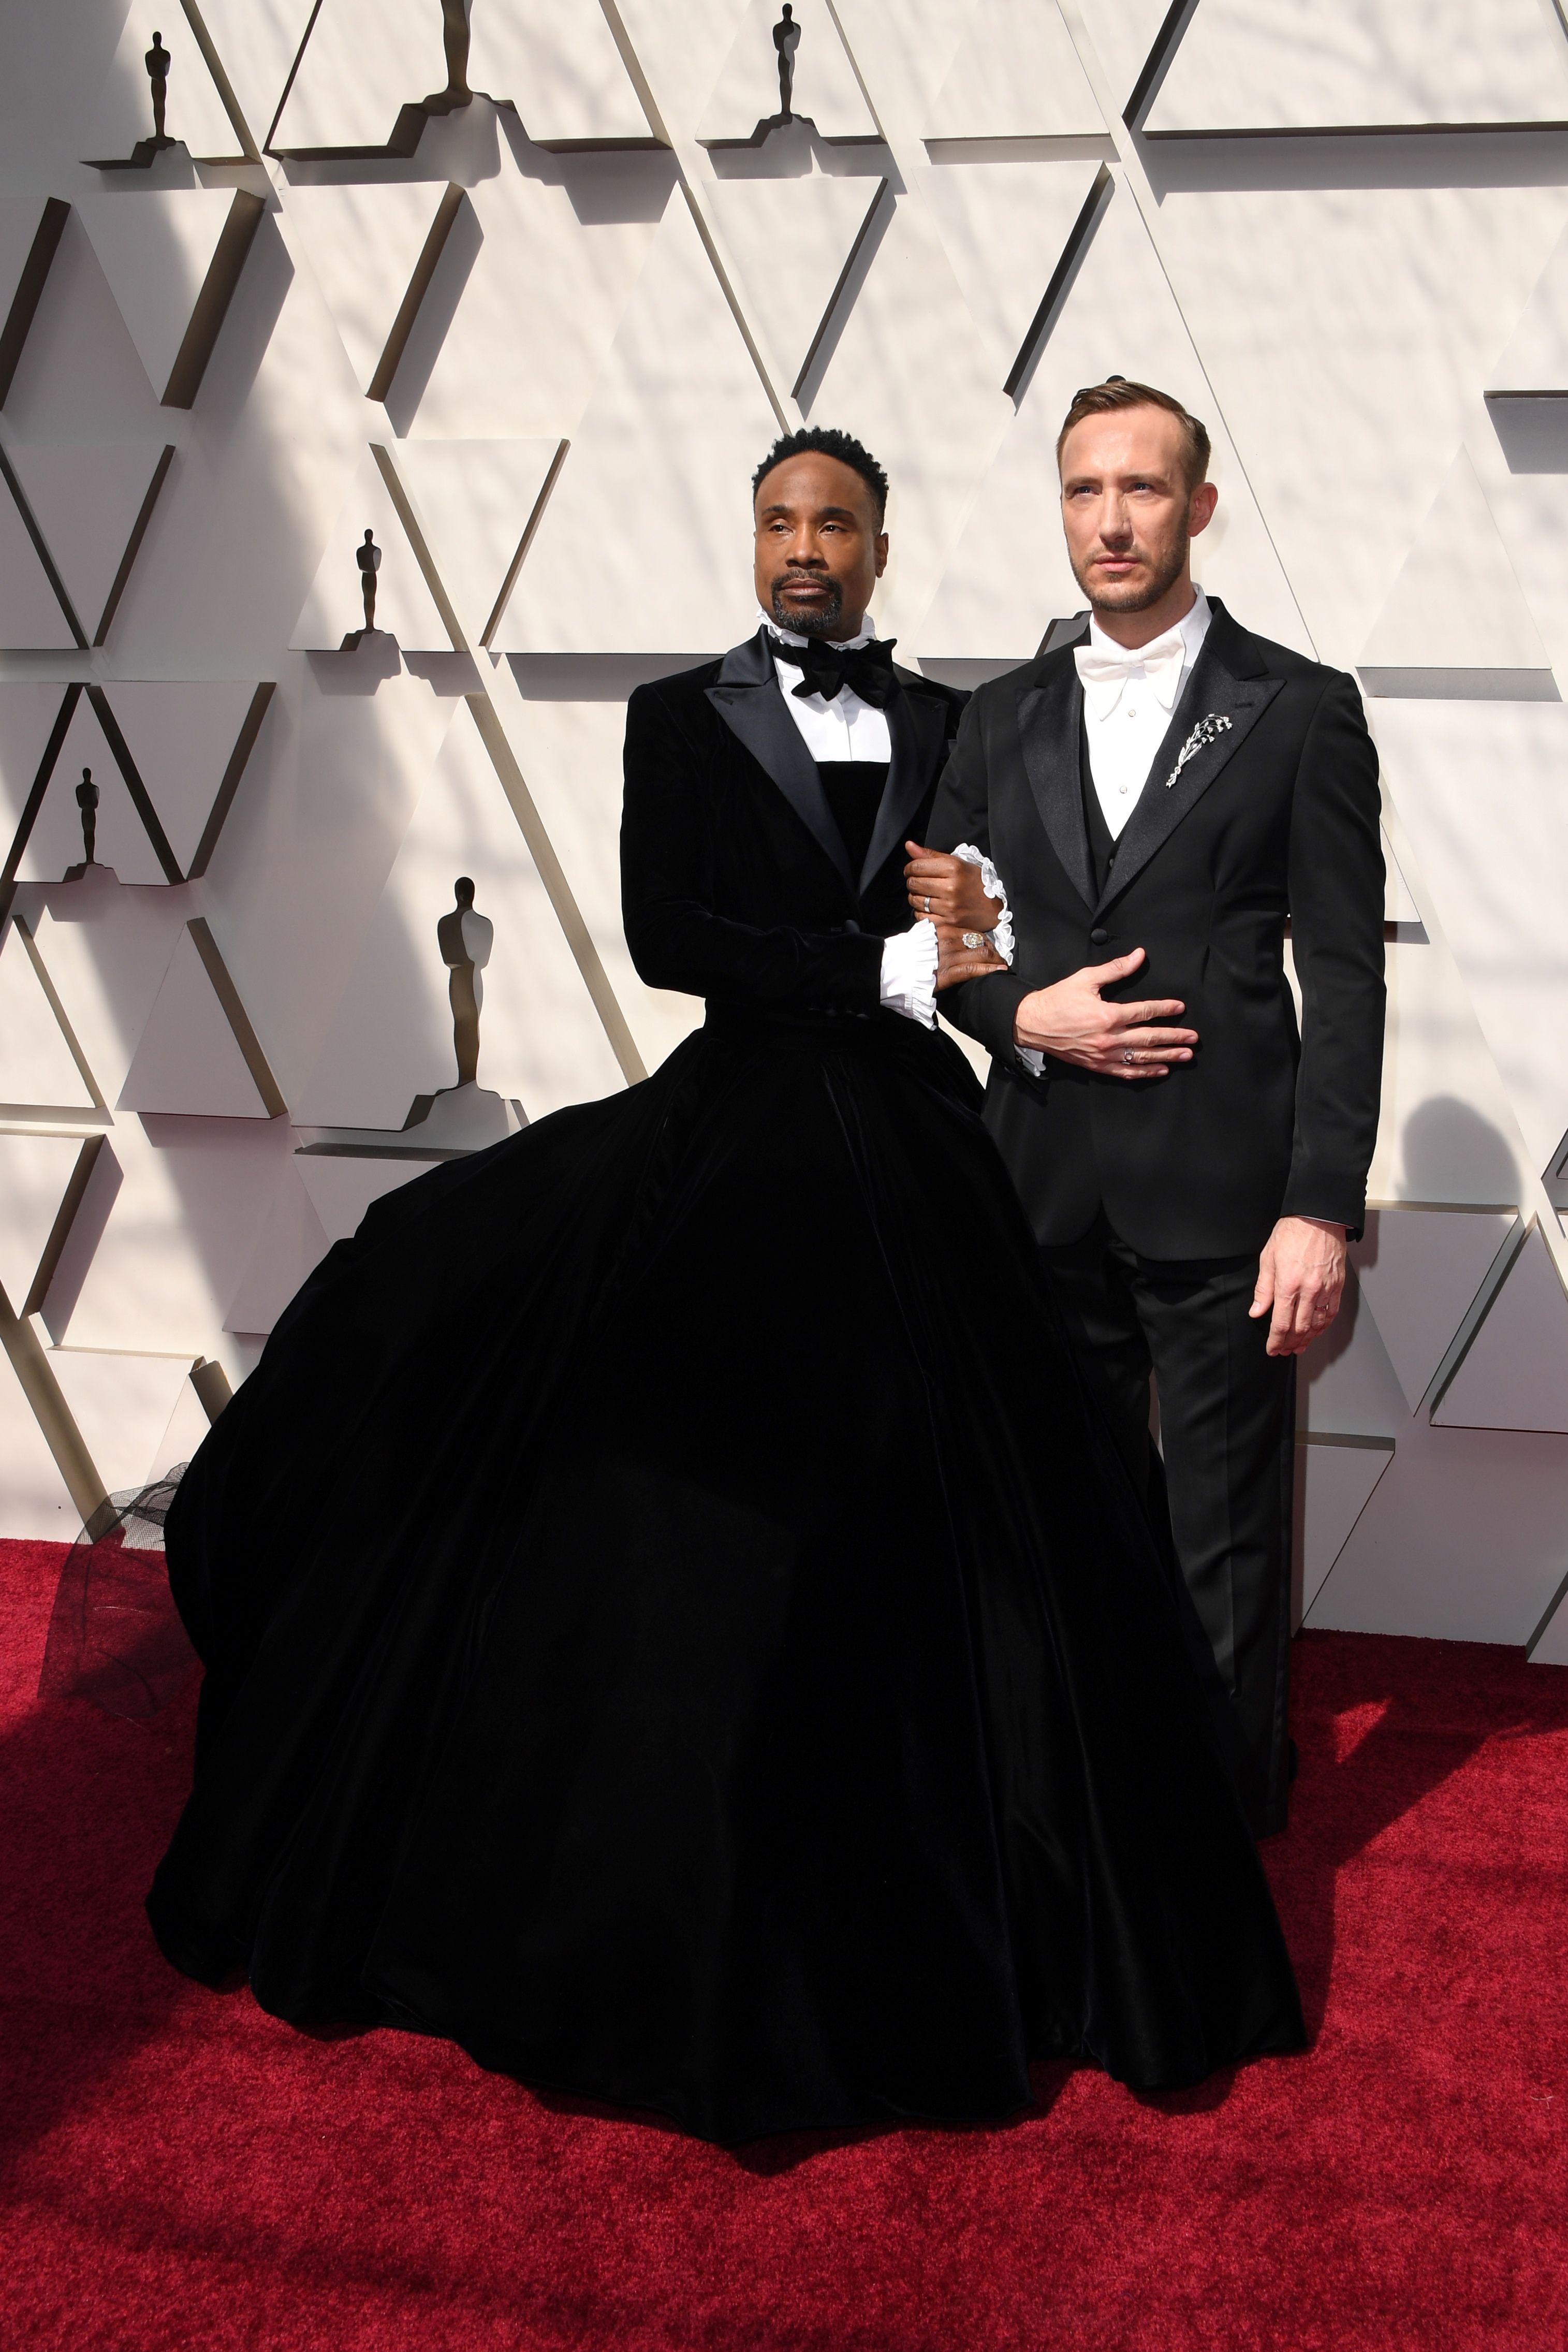 Billy Porter Wore Tux-Gown At Oscars But Our Gully Boy Ranveer Started This  Trend 3 Years Back!